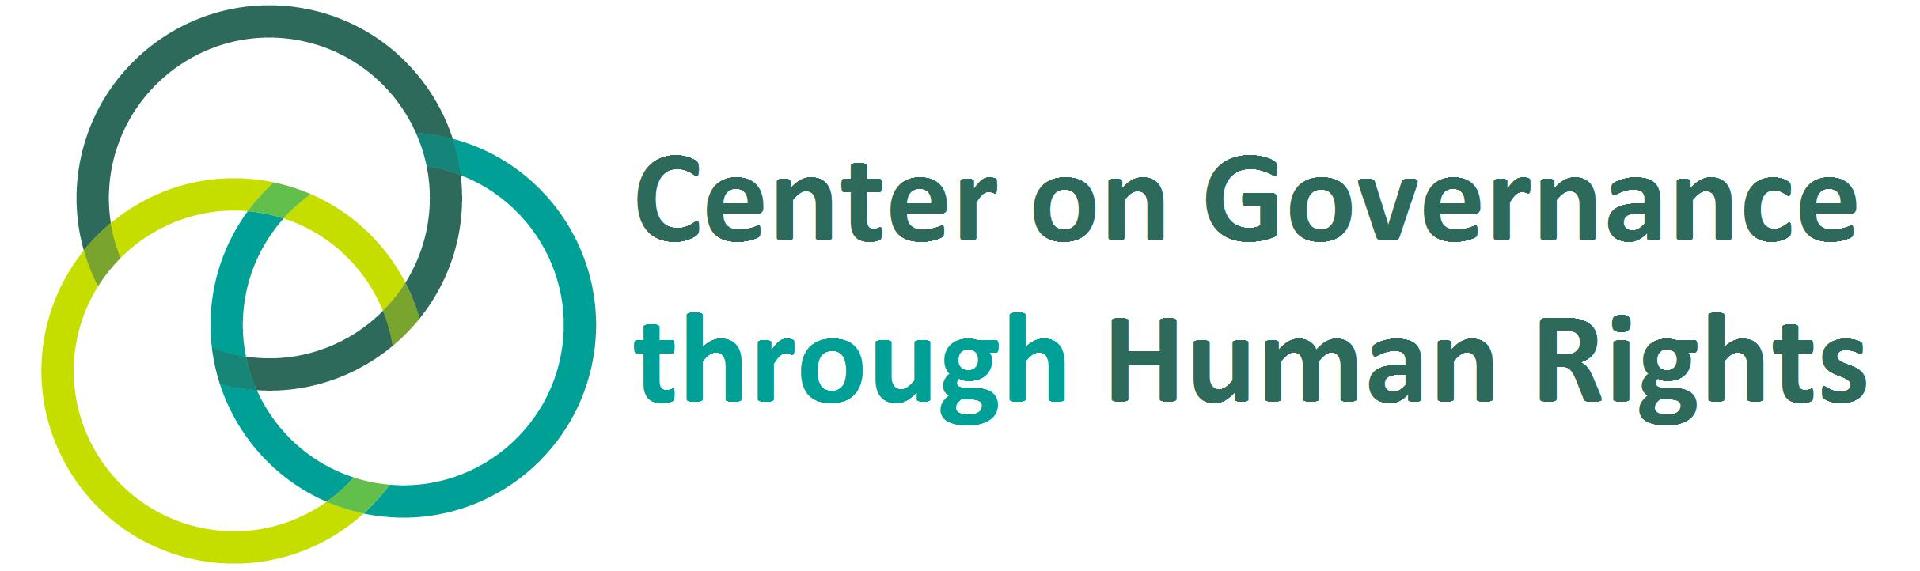 Center on Governance through Human Rights